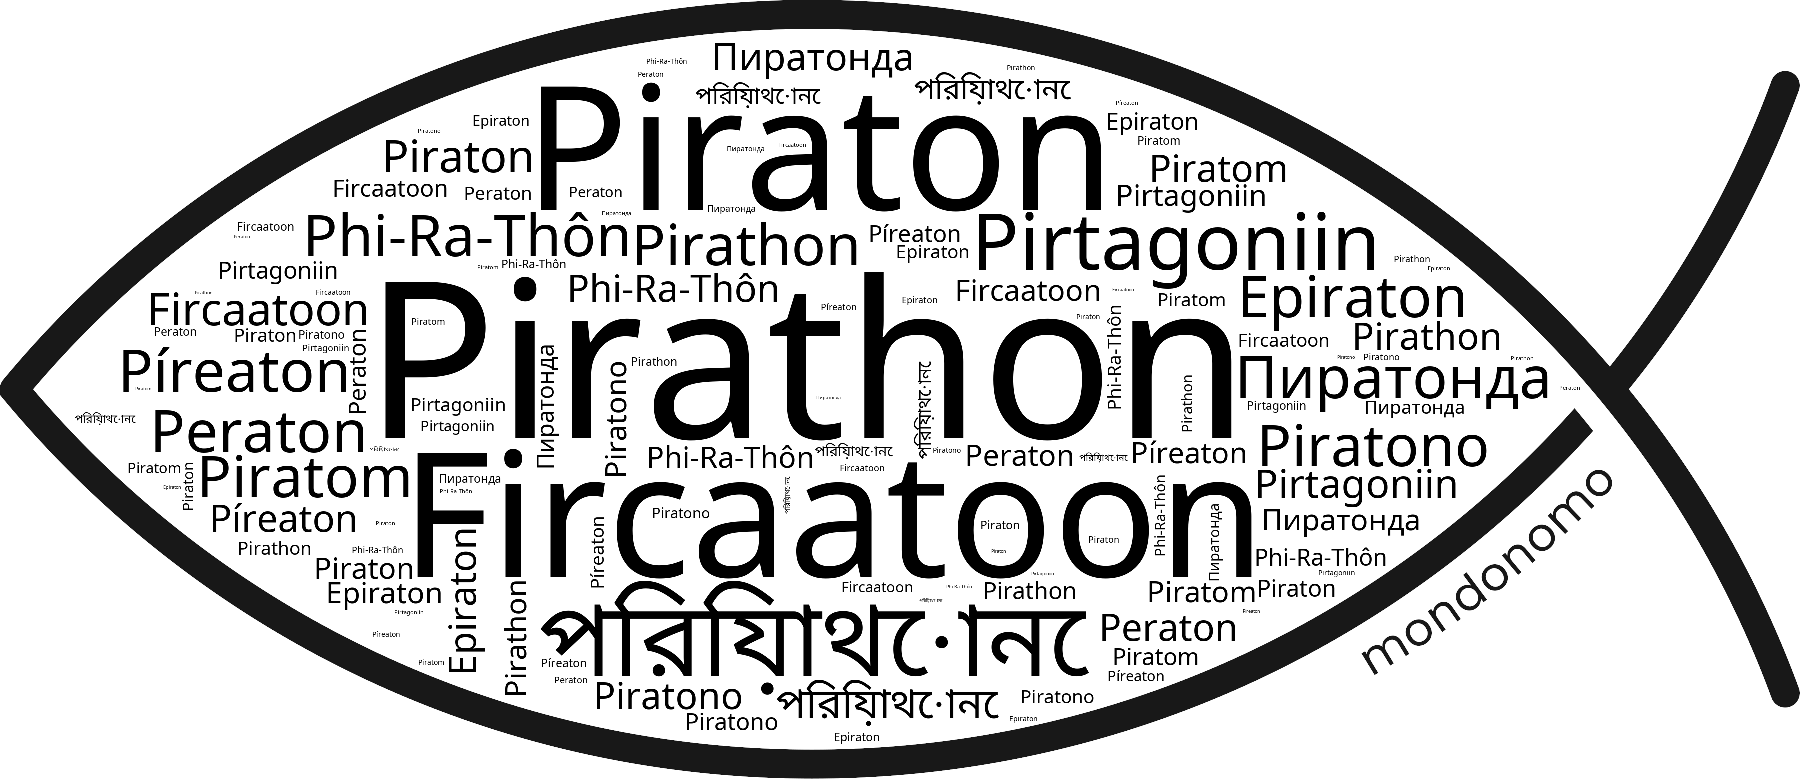 Name Pirathon in the world's Bibles